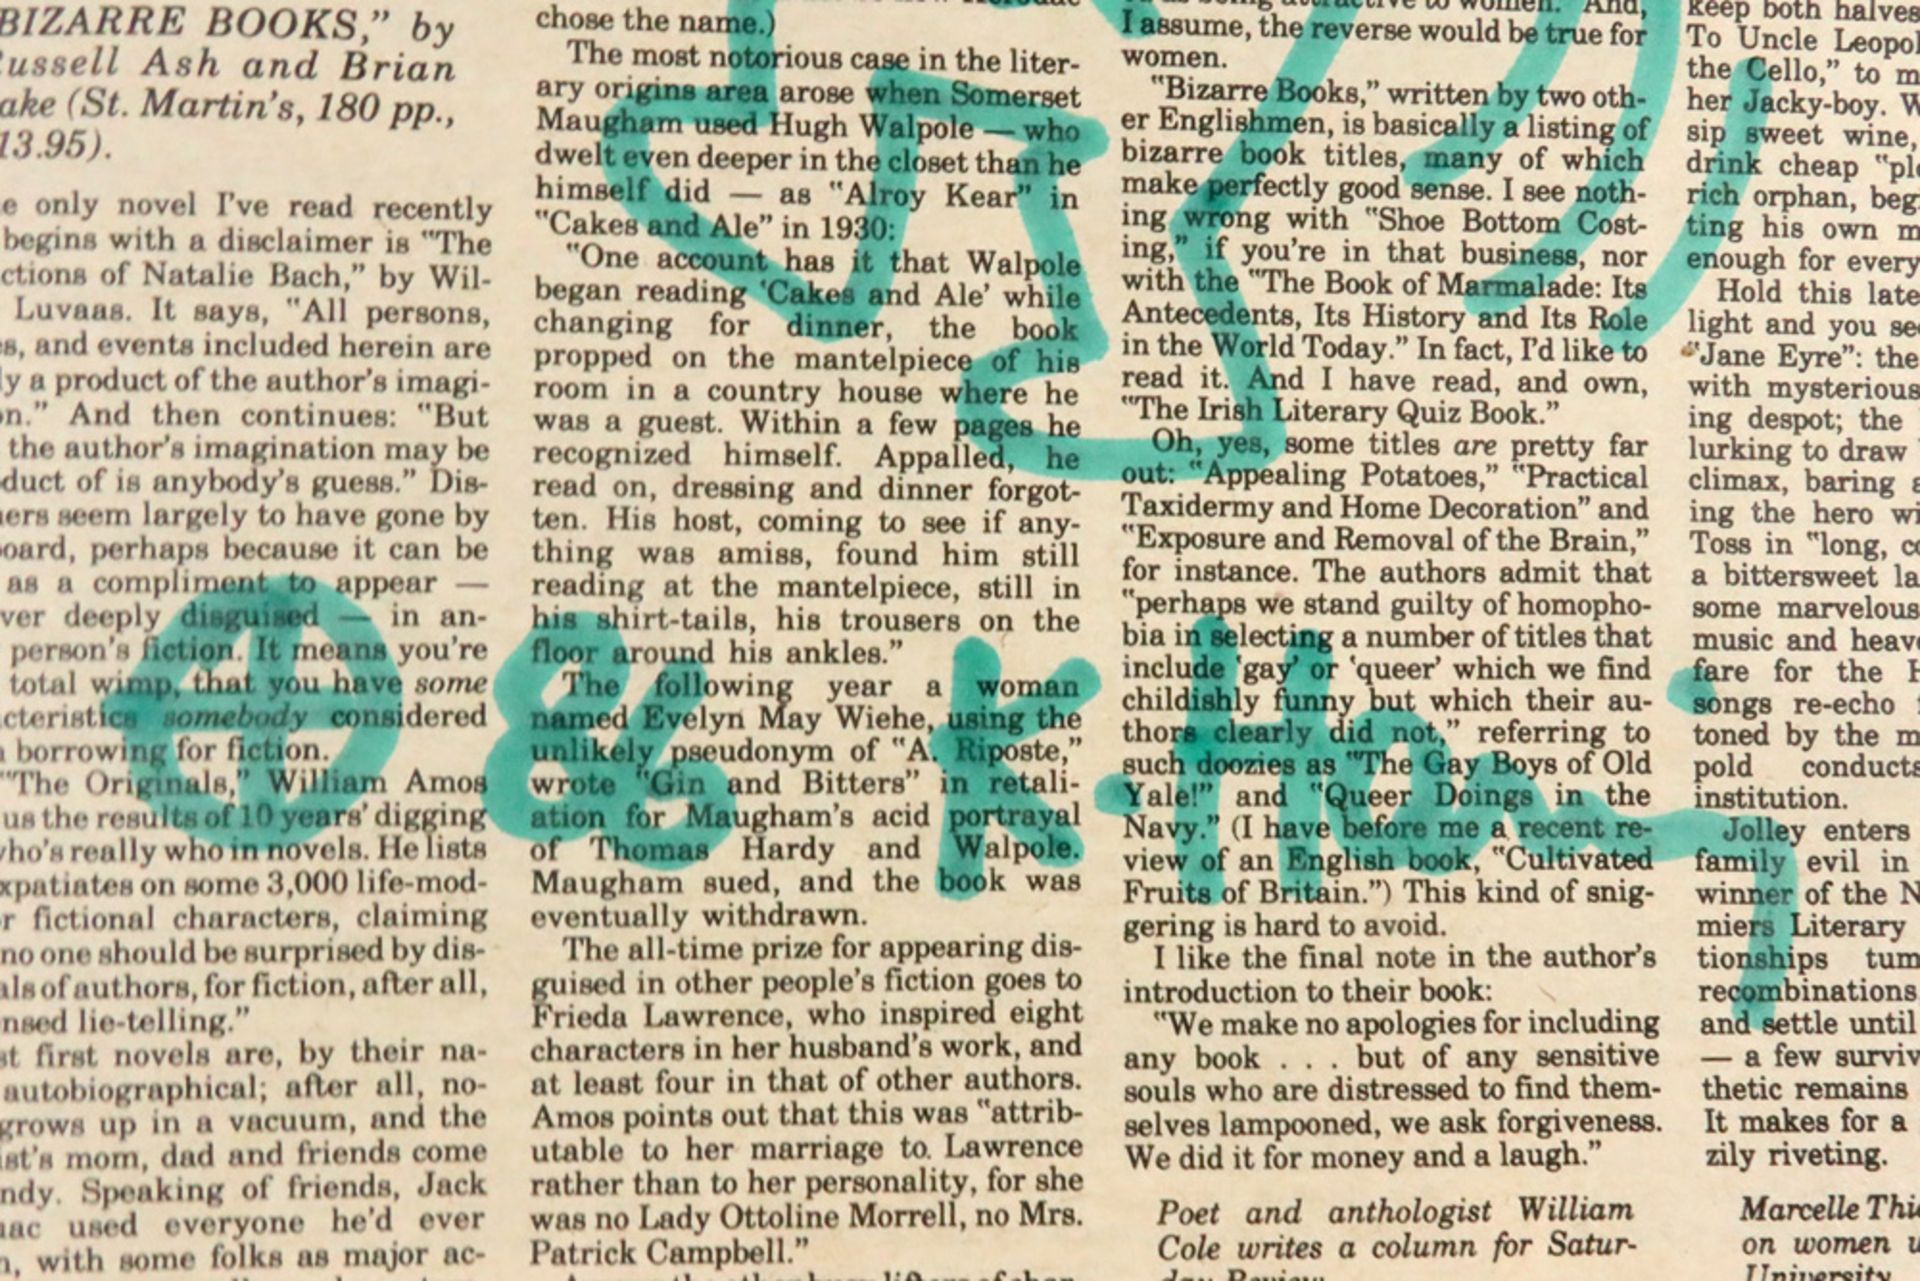 Keith Haring drawing in green feltpen on a newspaper (edition of "Newsday" dd Sunday, July 6, - Image 2 of 8